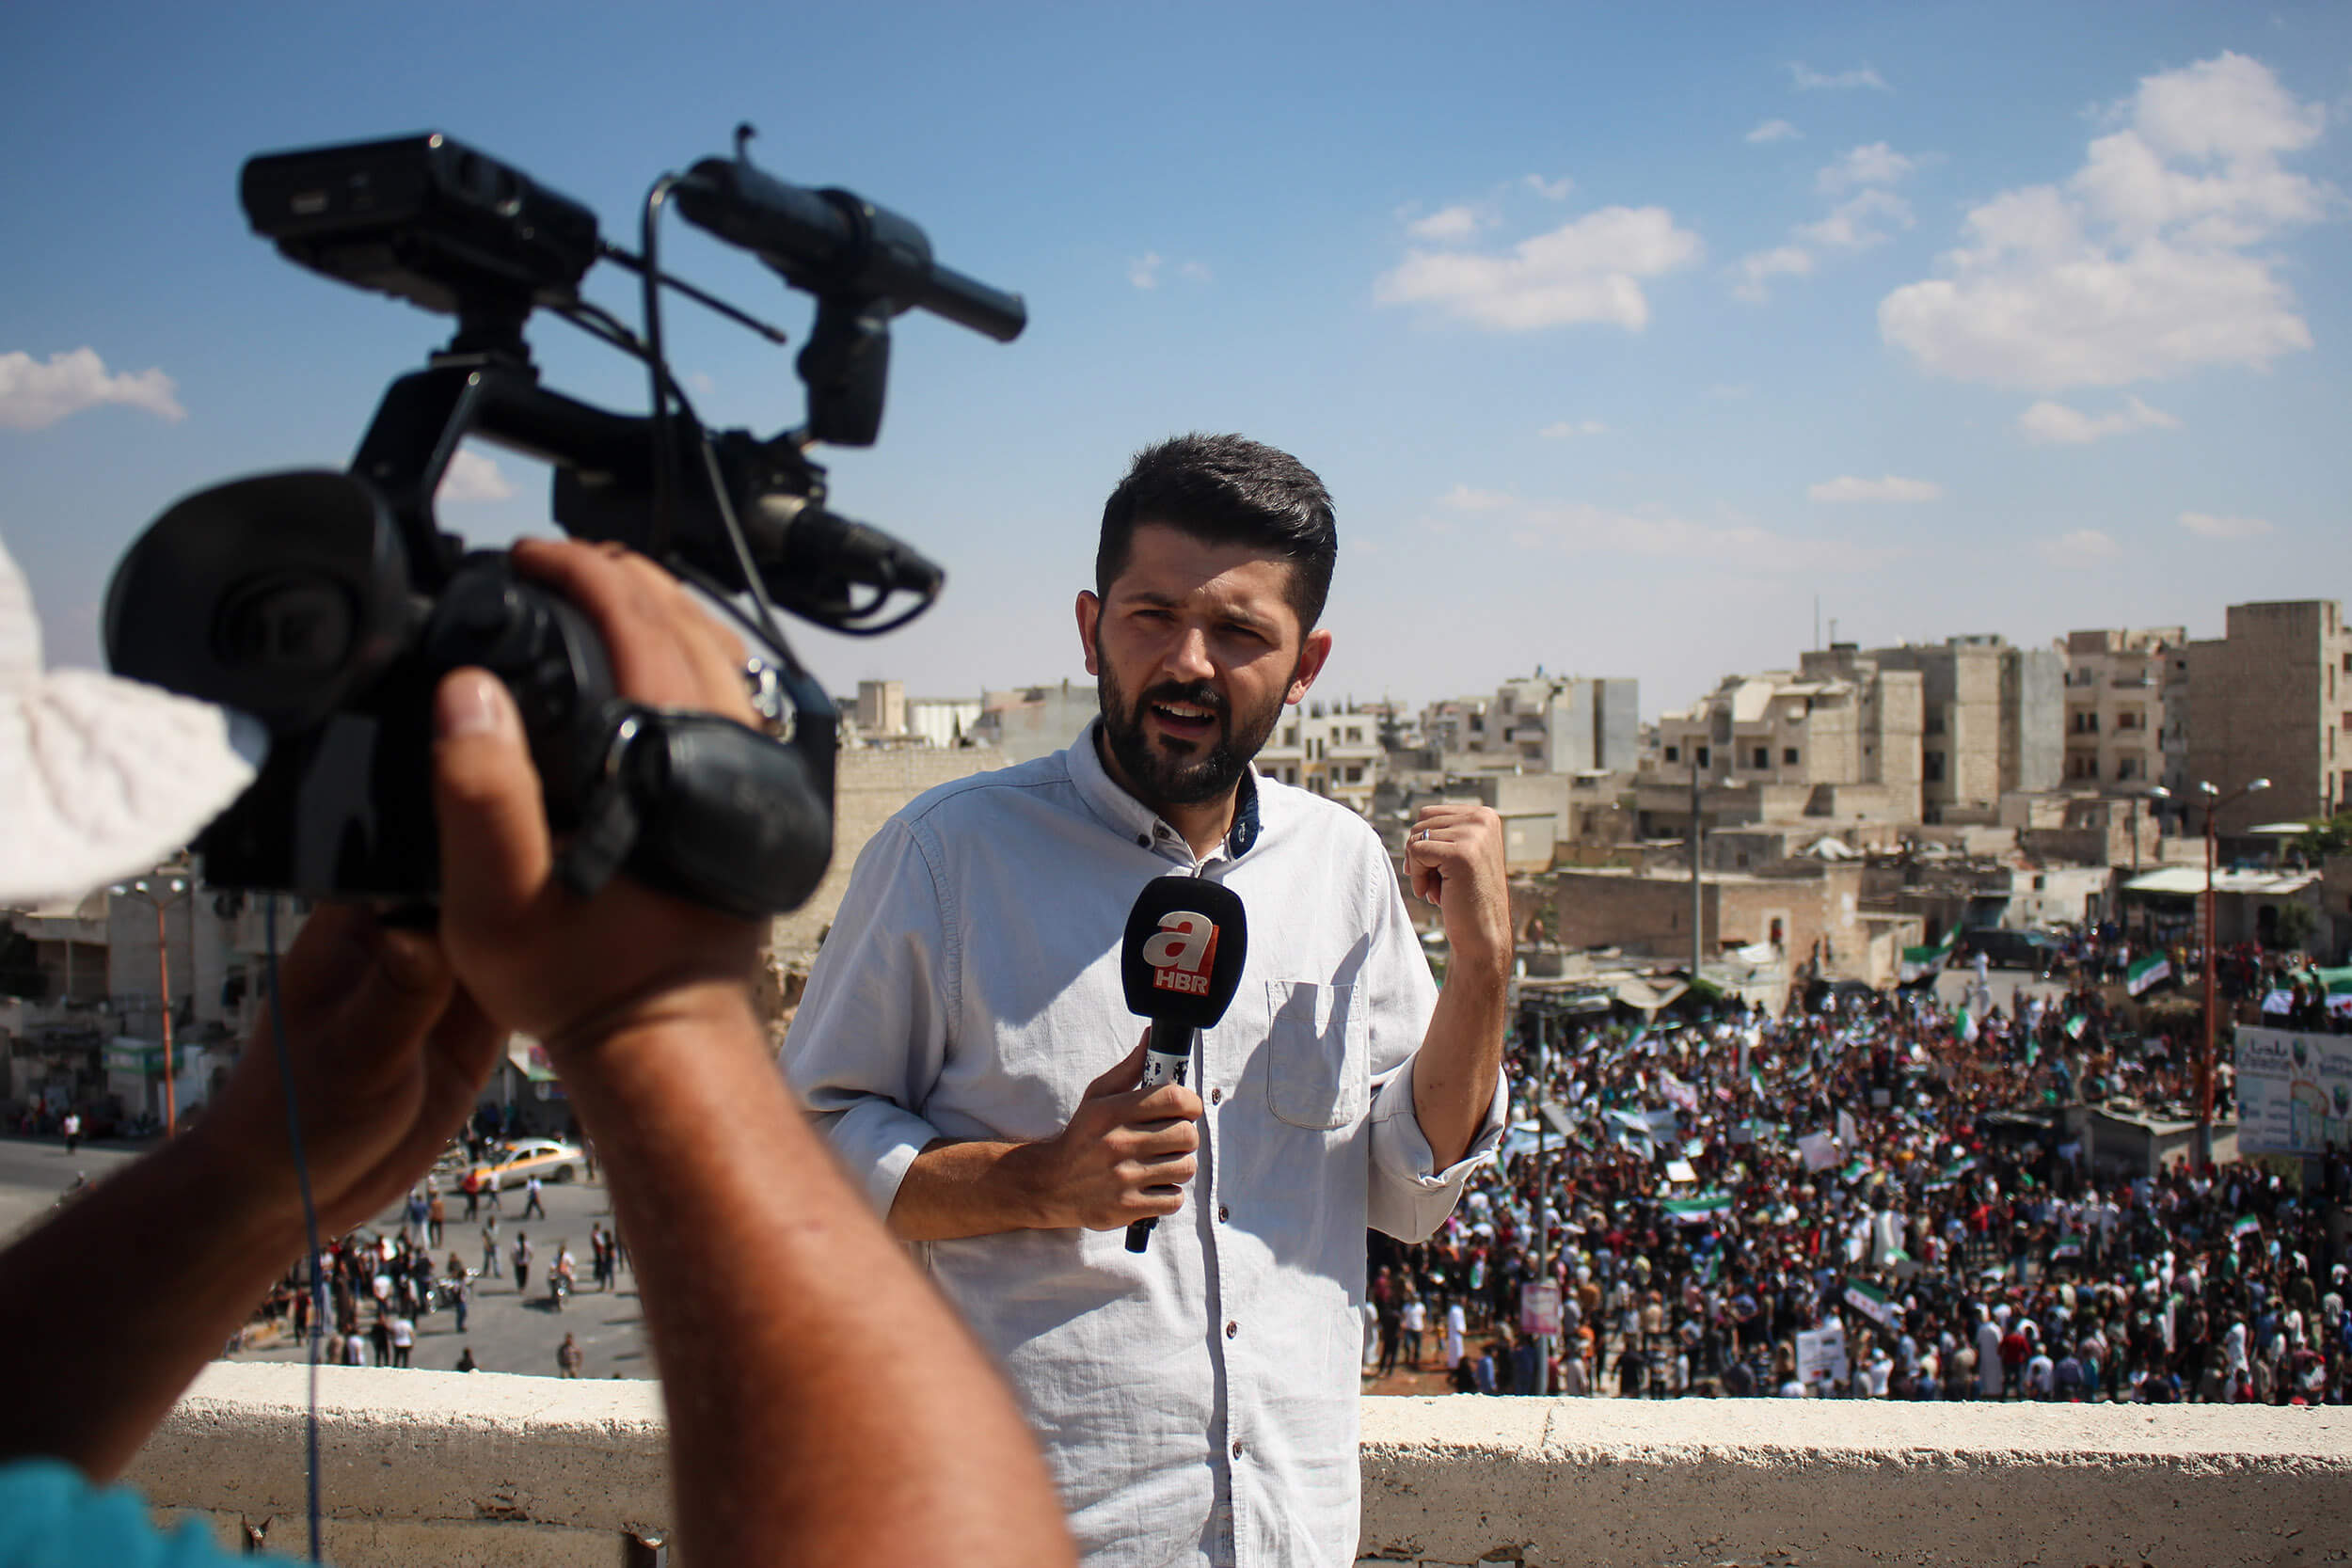 New consortium in support of independent media in the Middle East and North Africa